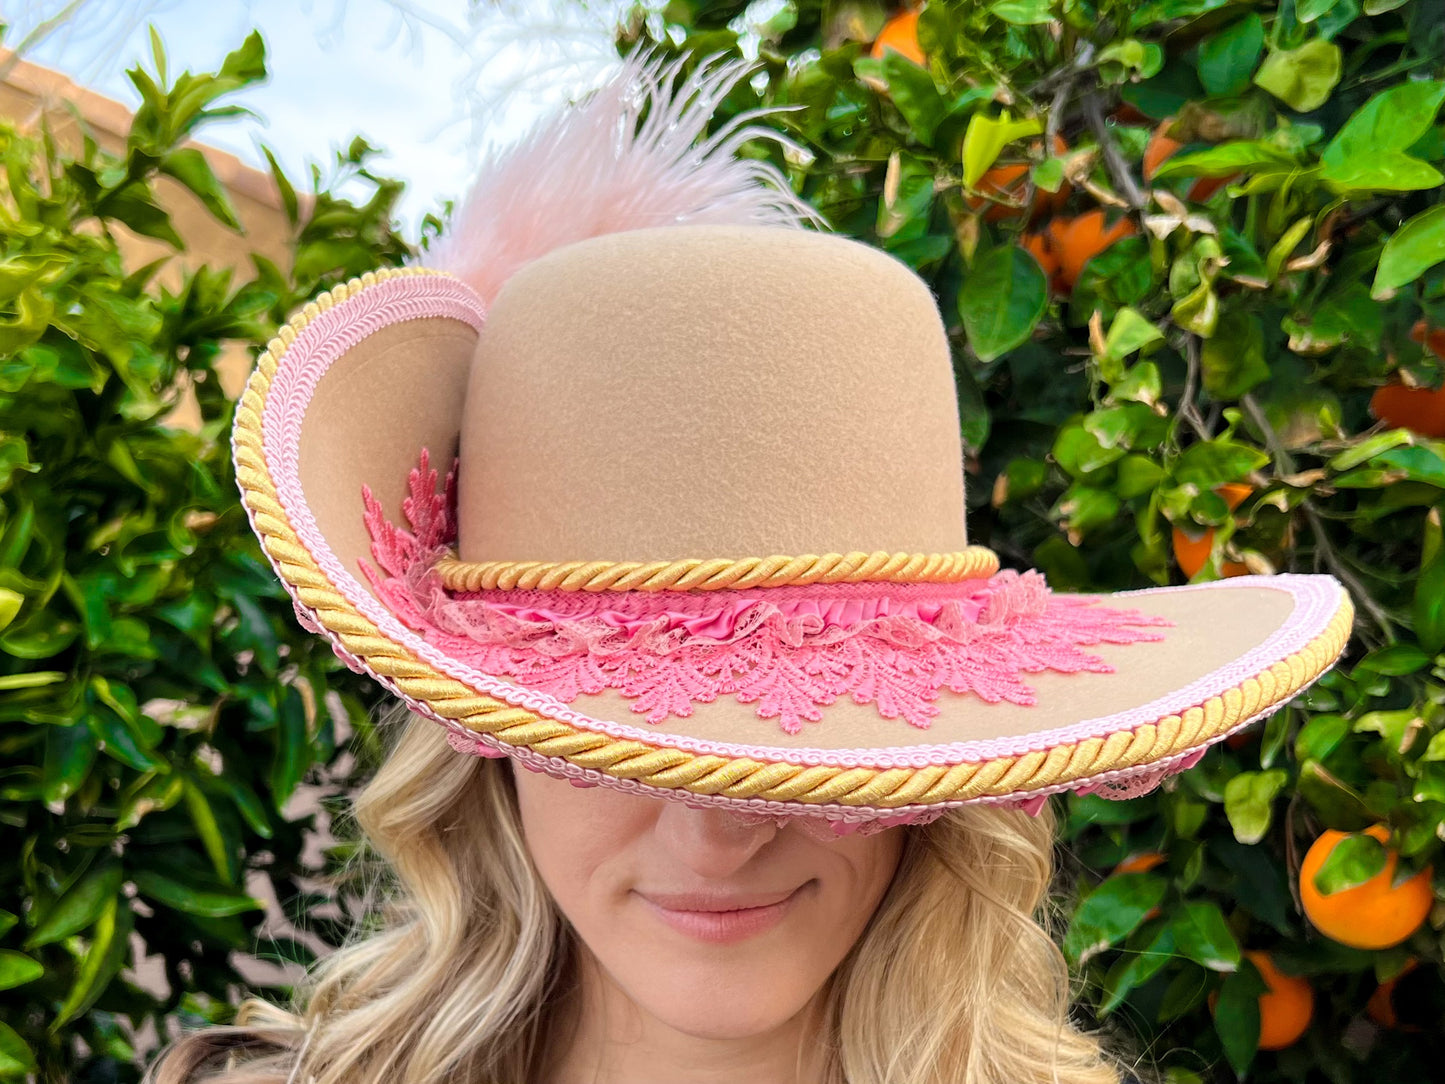 Cavalier Hat 22" Tan Wool Base with Barbie Pink Trim, Feathers, and Gold Brooch